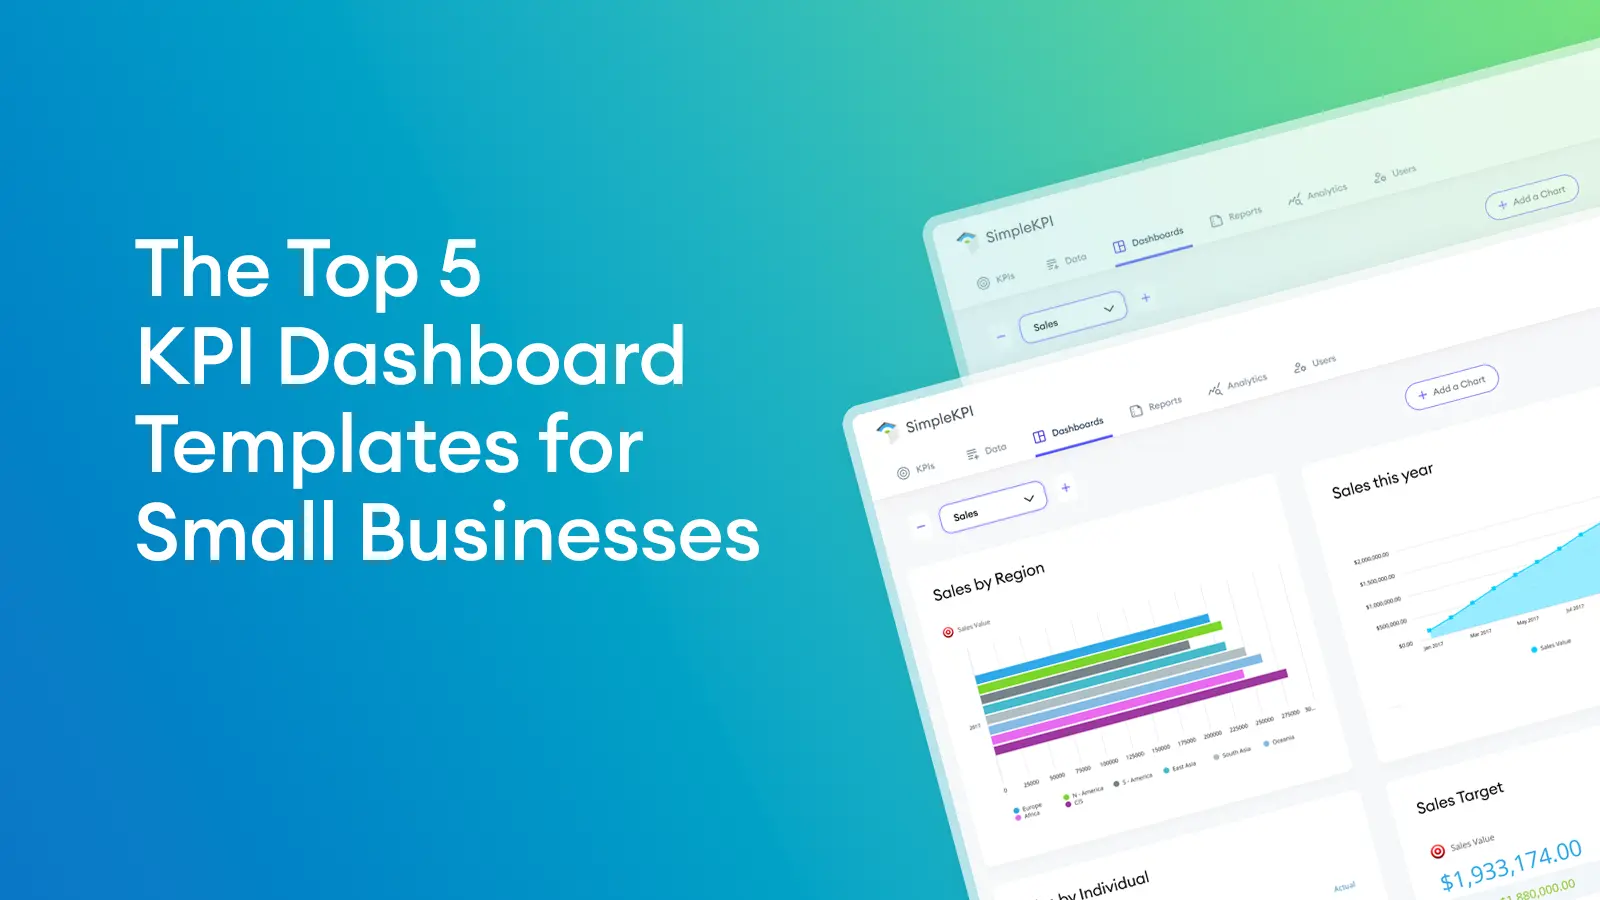 KPI Dashboard templates on a blue background with the words the top 5 KPI dashboard templates for business overlayed